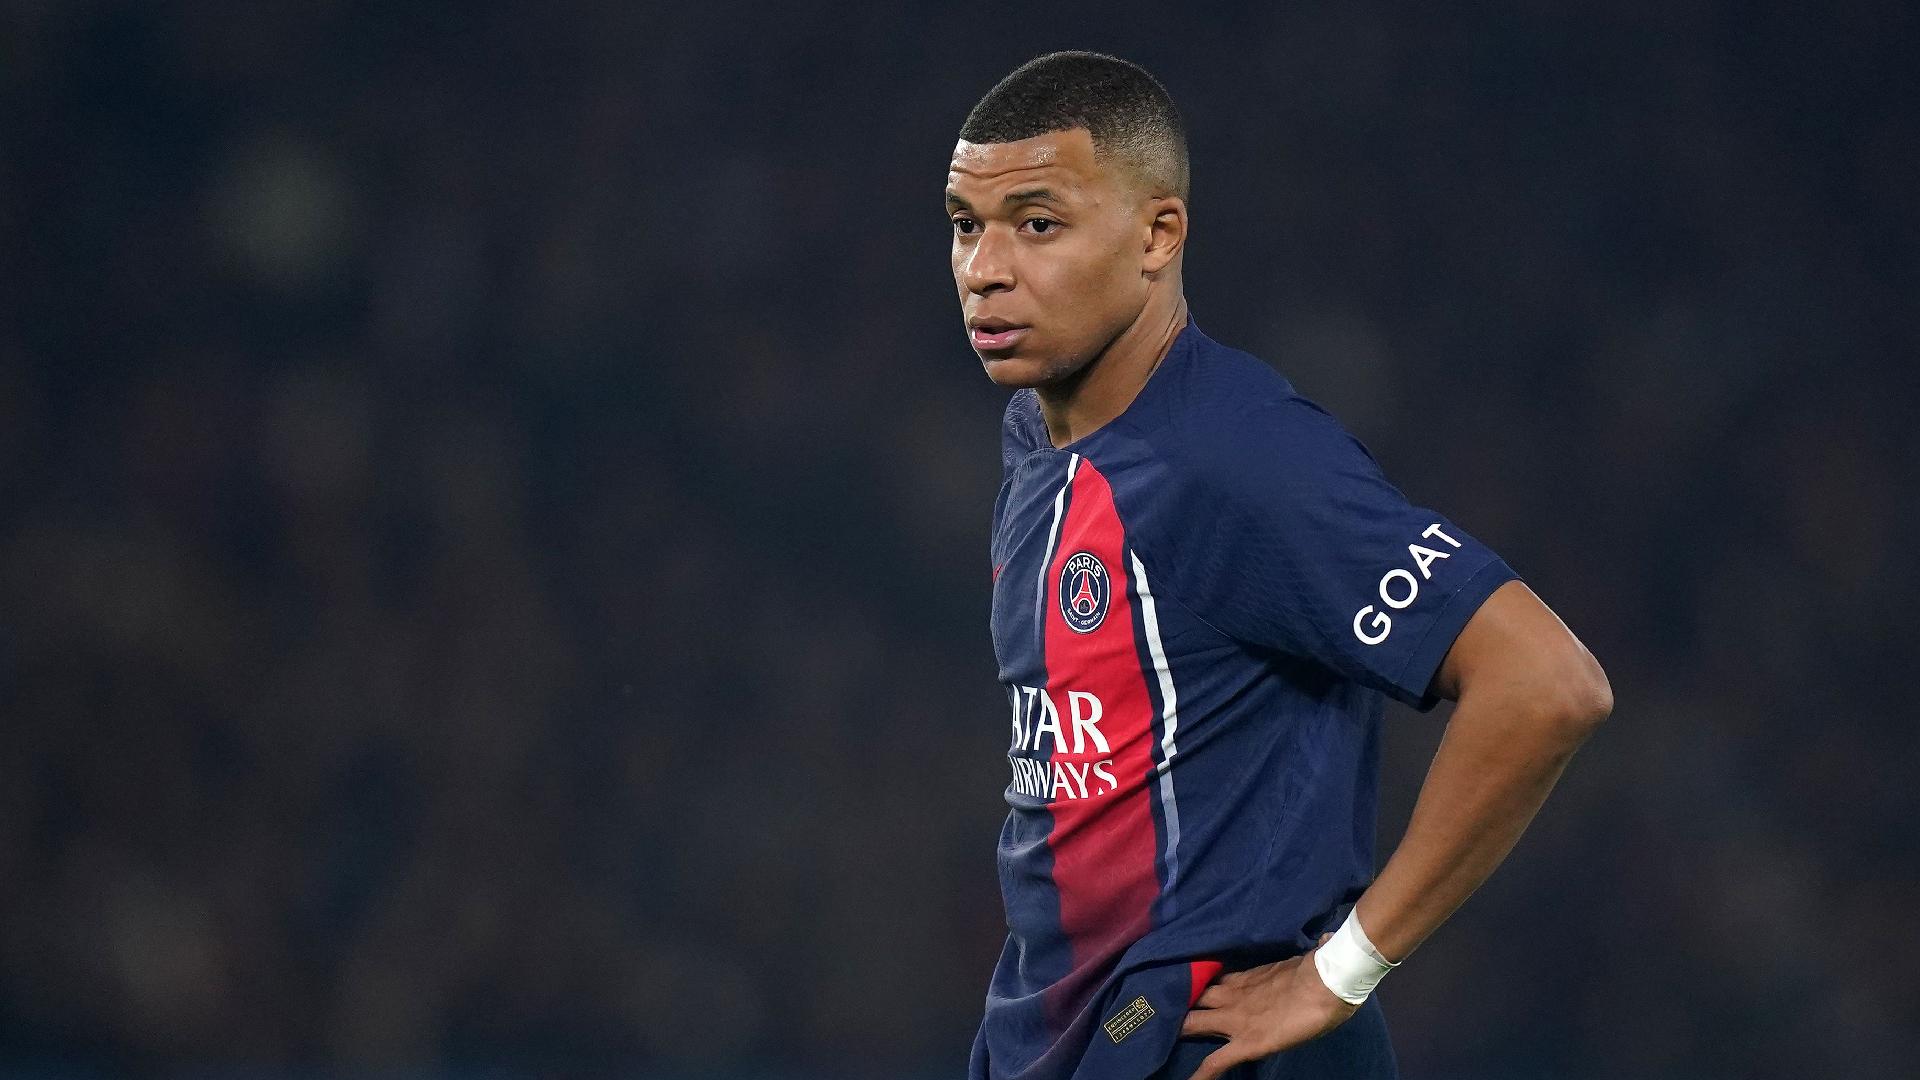 Further indications point towards Kylian Mbappe arriving at Real Madrid this summer